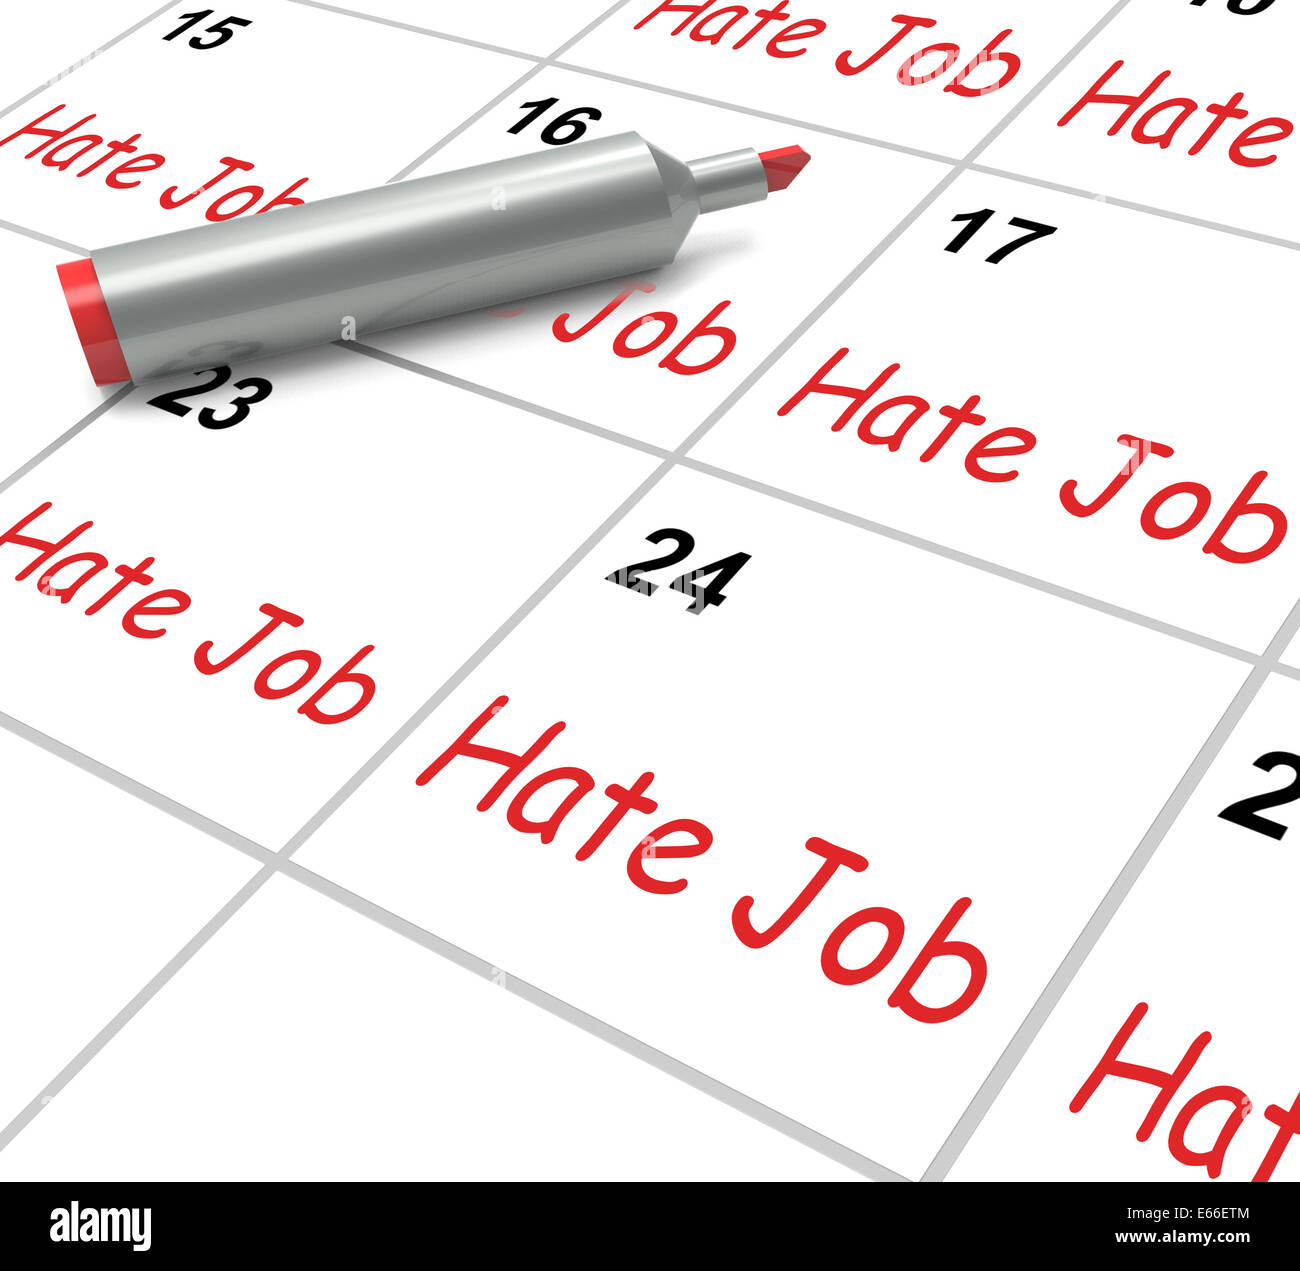 Hate Job Calendar Meaning Miserable At Work Stock Photo